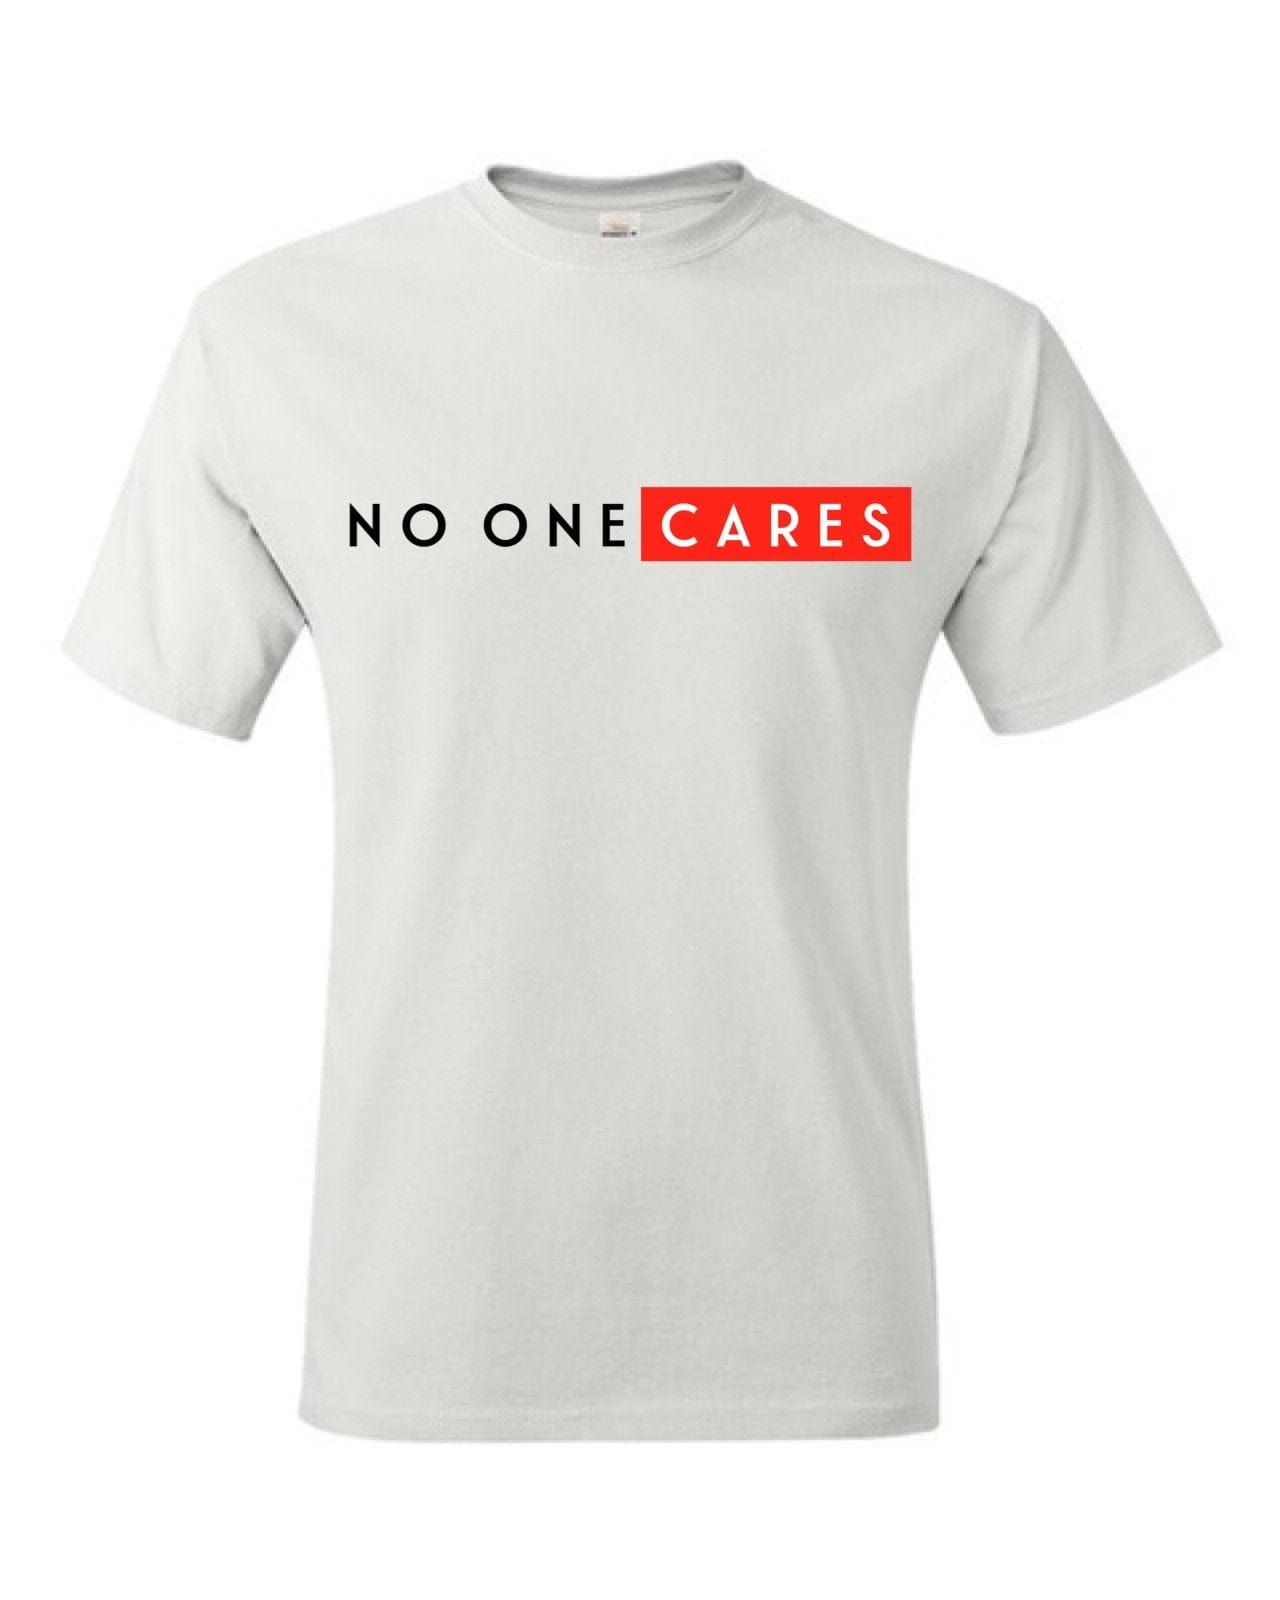 InsensitiviTees Shirts S / White No One Cares